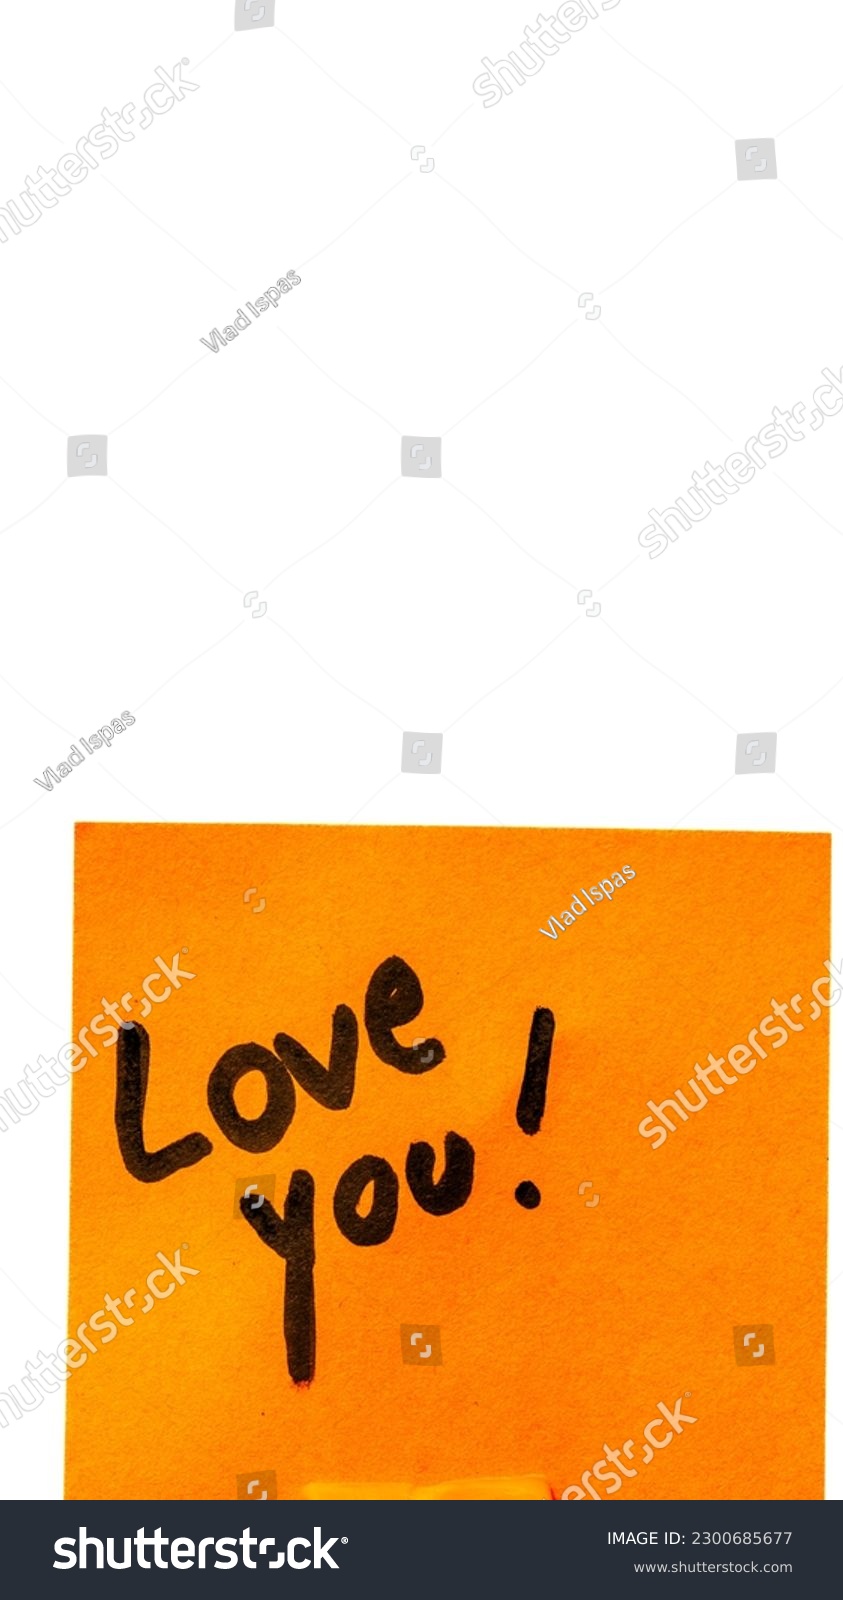 Love you handwriting text close up isolated on orange paper with copy space. #2300685677